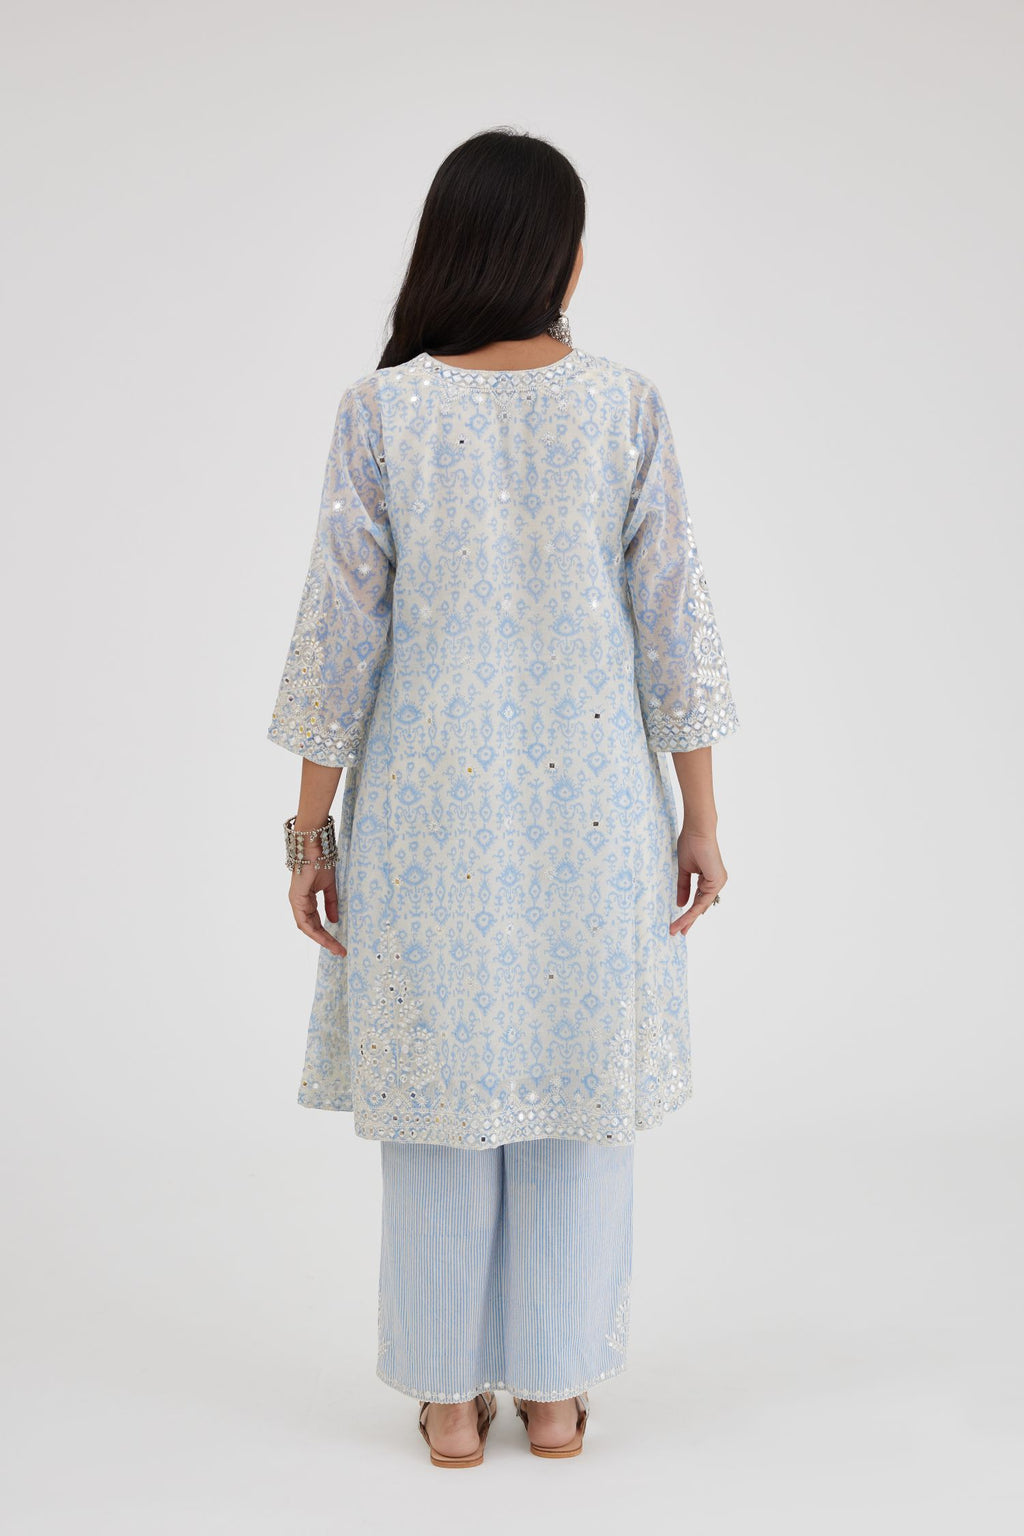 Ikat design blue and off white hand block-printed Cotton Chanderi short panelled kurta set with off-white thread and mirror embroidery.